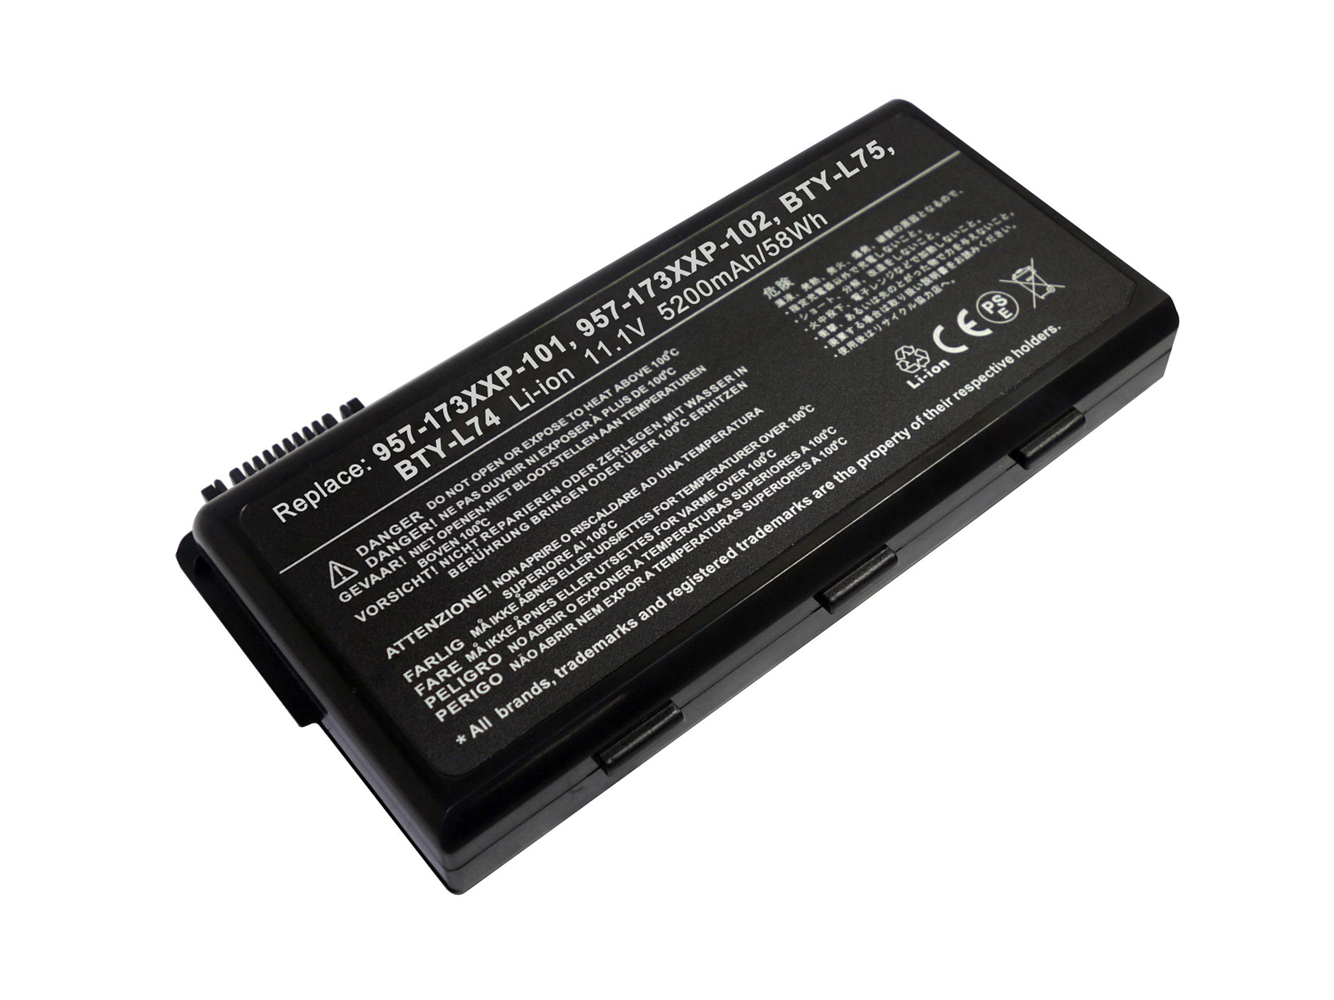 957-173XXP-101, 957-173XXP-102 replacement Laptop Battery for MSI A5000, A6000, 6 cells, 5200mAh, 11.10V